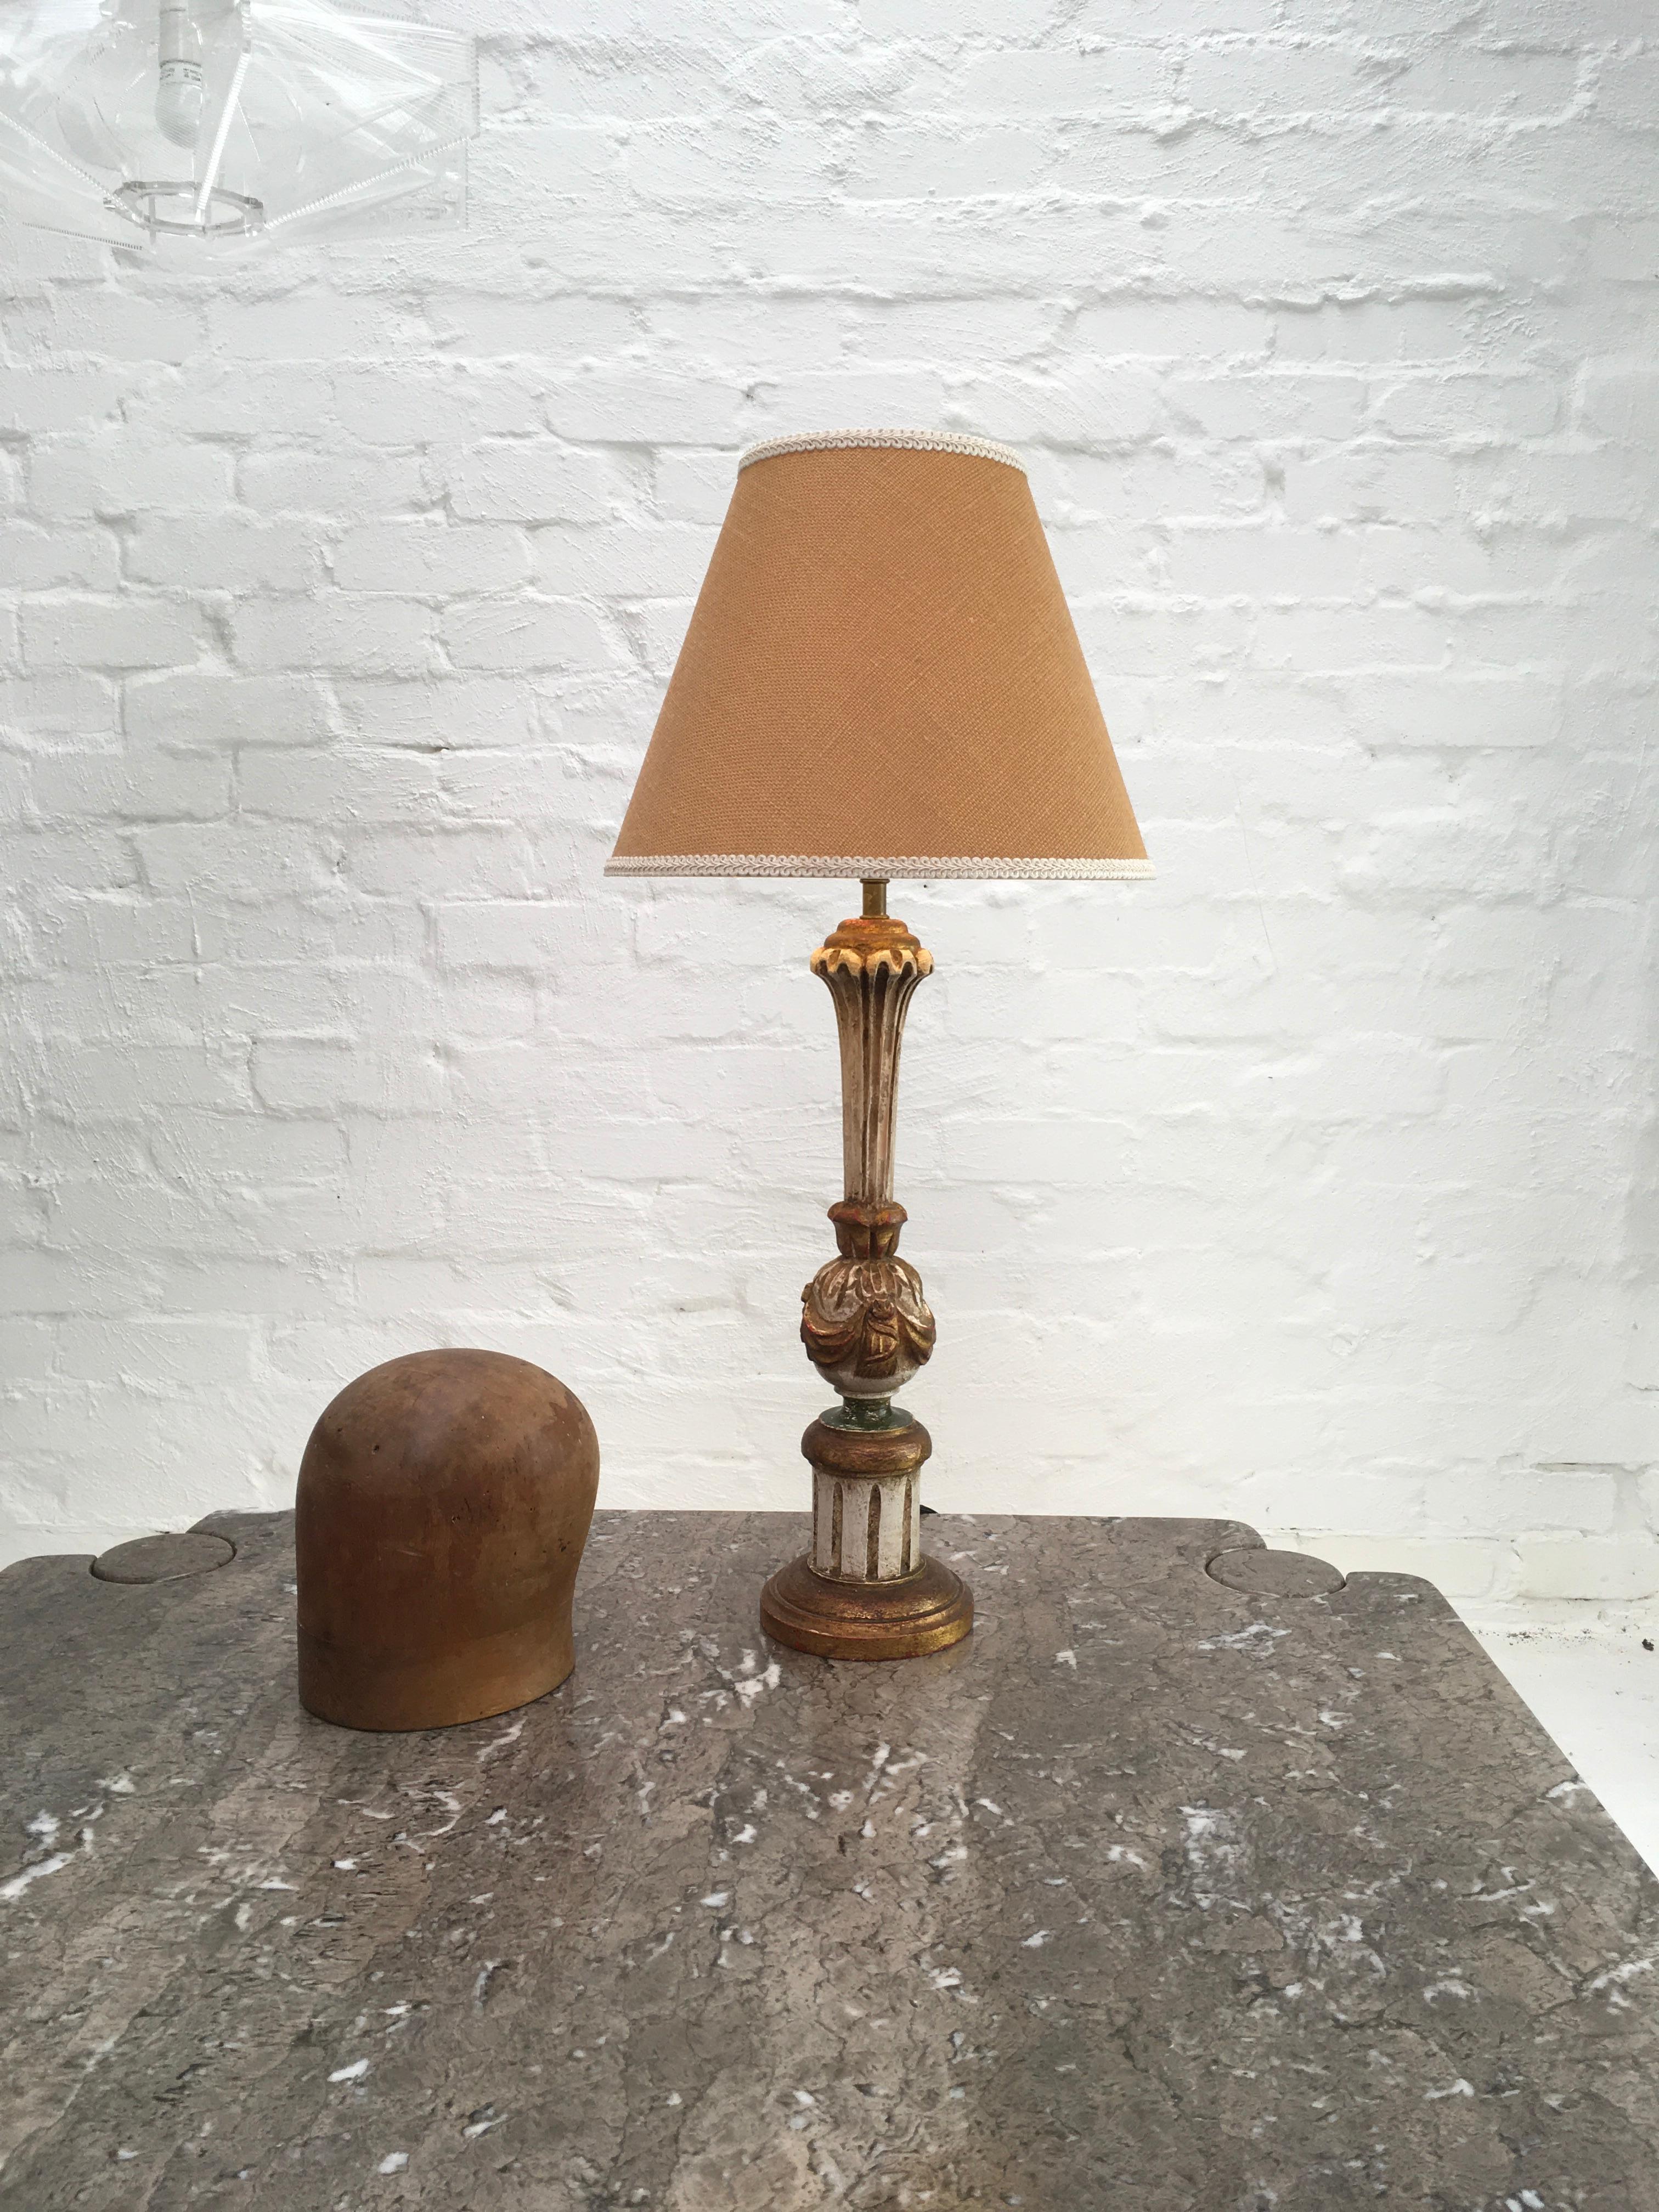 Italian Mid-20th Century Florentine Giltwood Lamp with Original Shade Regency Style For Sale